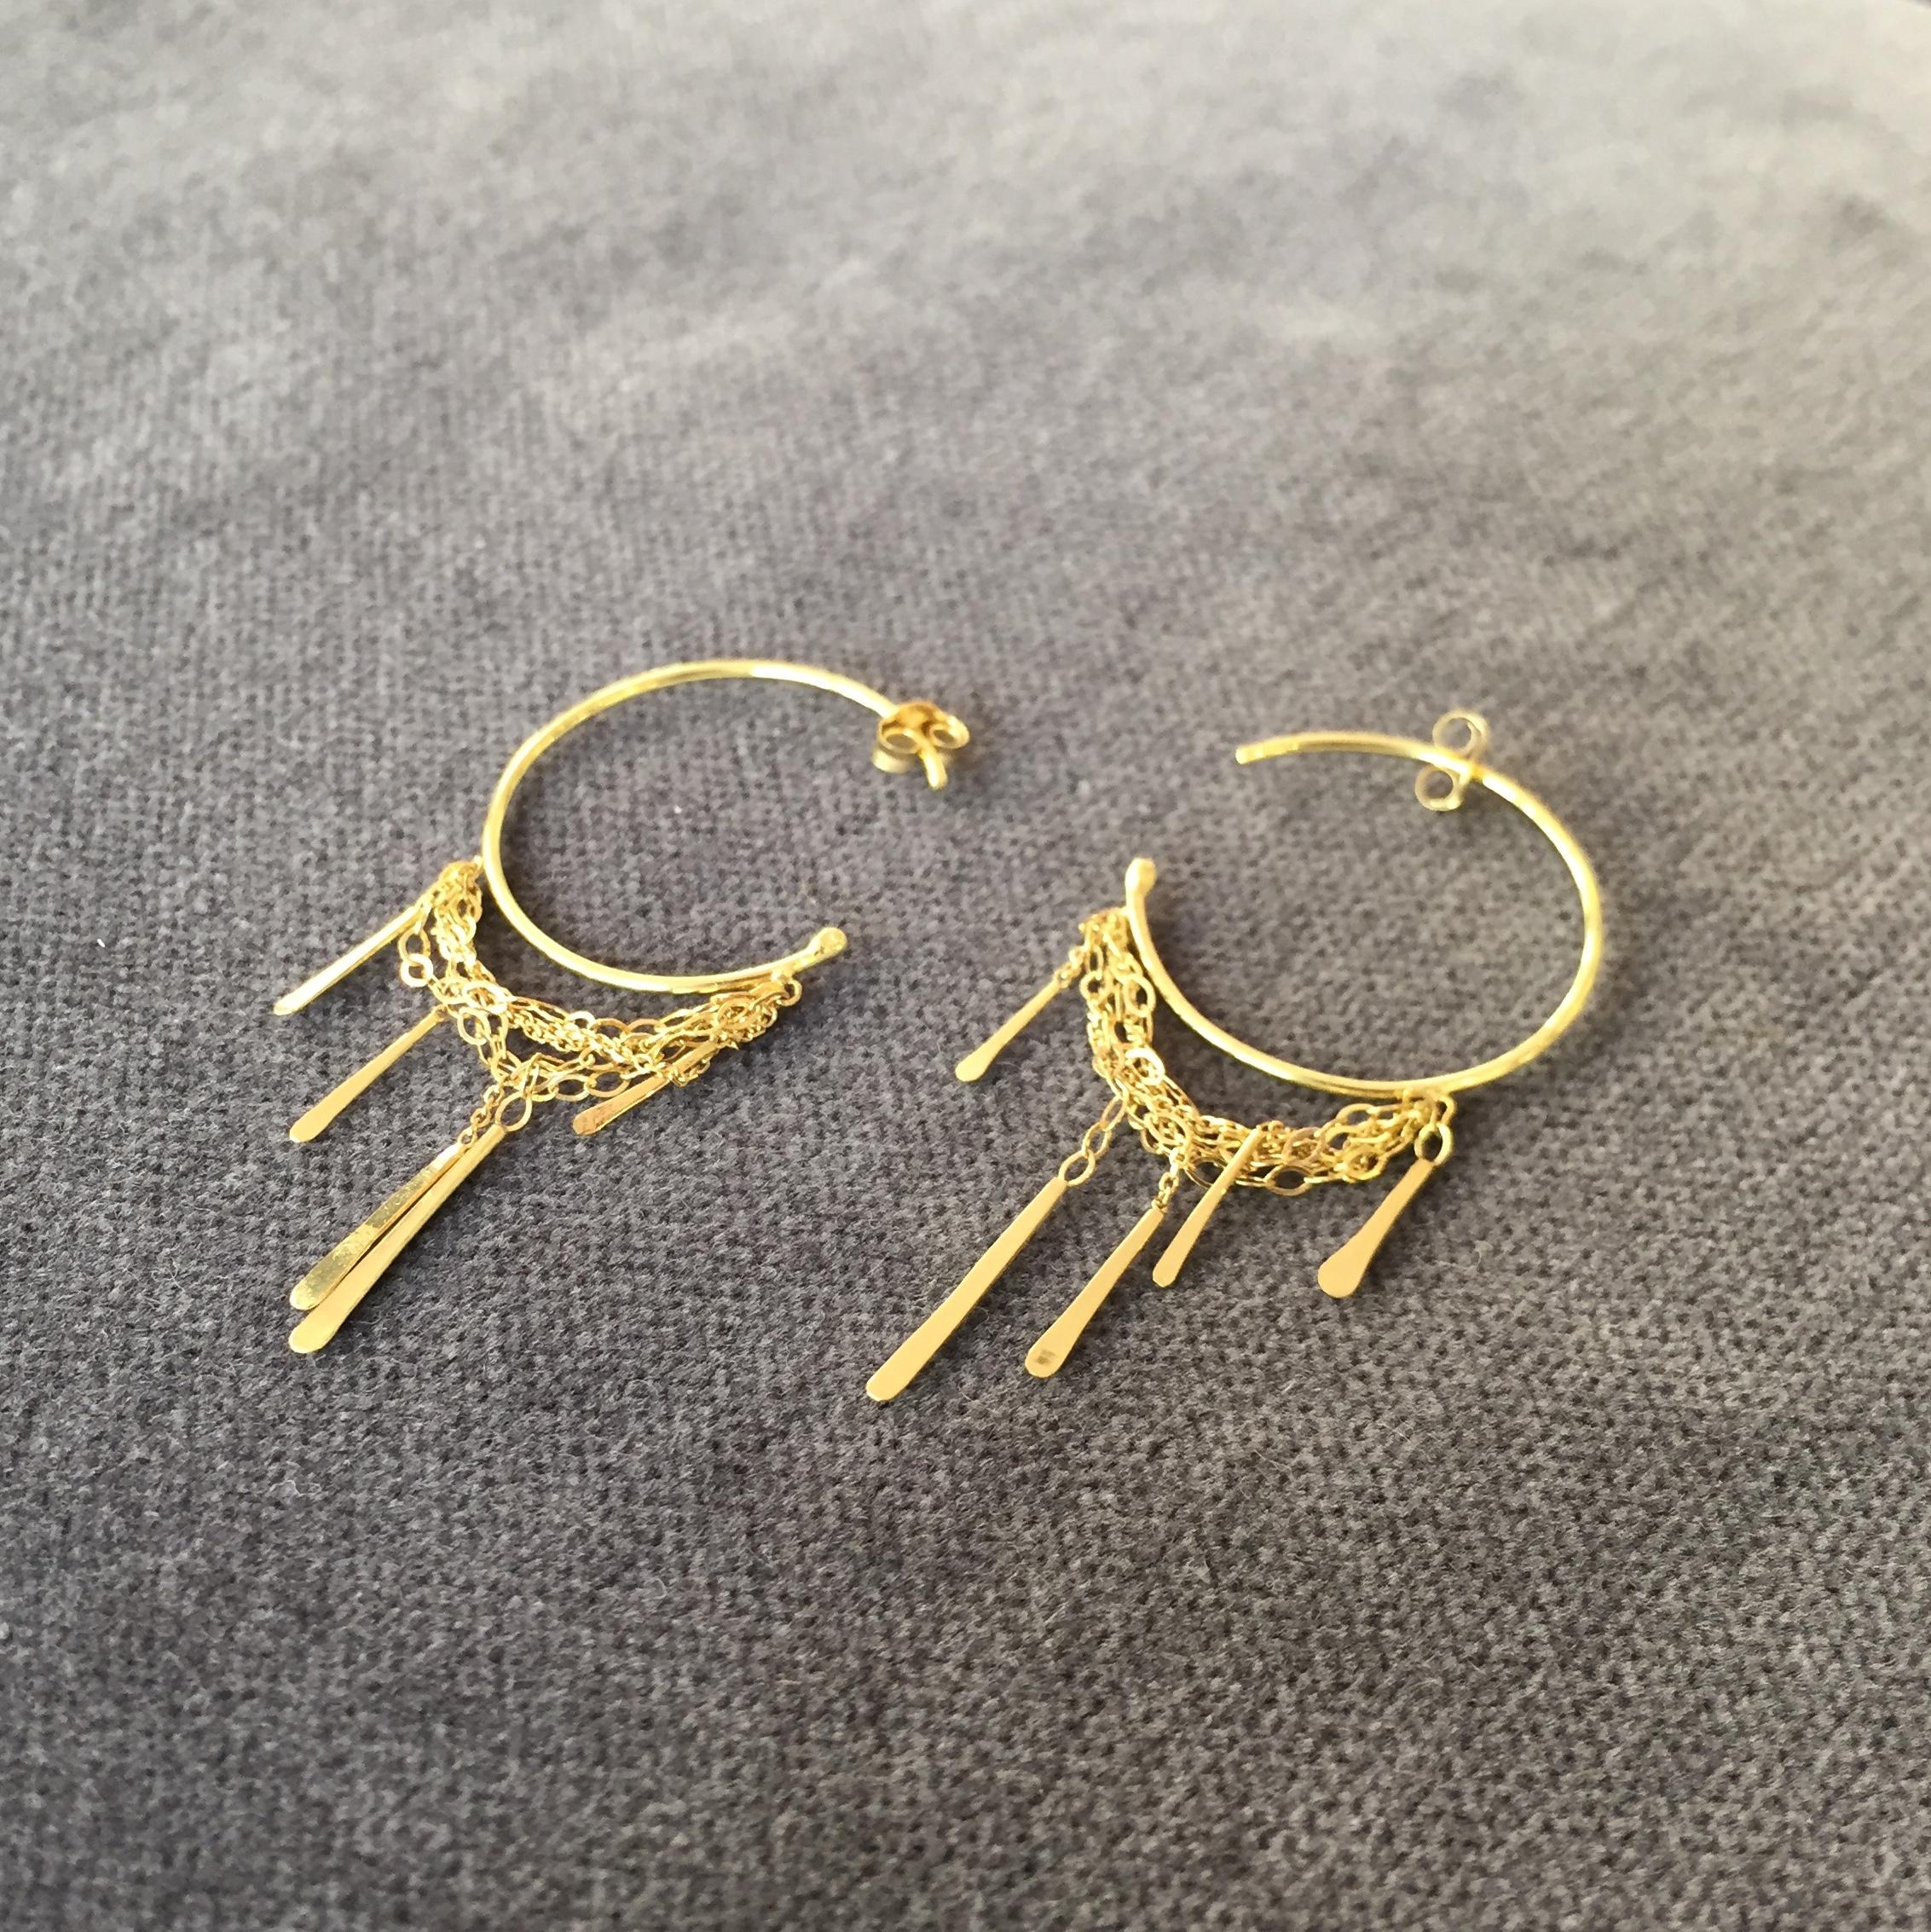 These hoop earrings from Sweet Pea's 'Sycamore' collection are made from 18k yellow gold and feature a drape of multi layered chain and five hanging bars for a beautifully delicate look. The hoop diameter is 2.2cm and the overall length of each